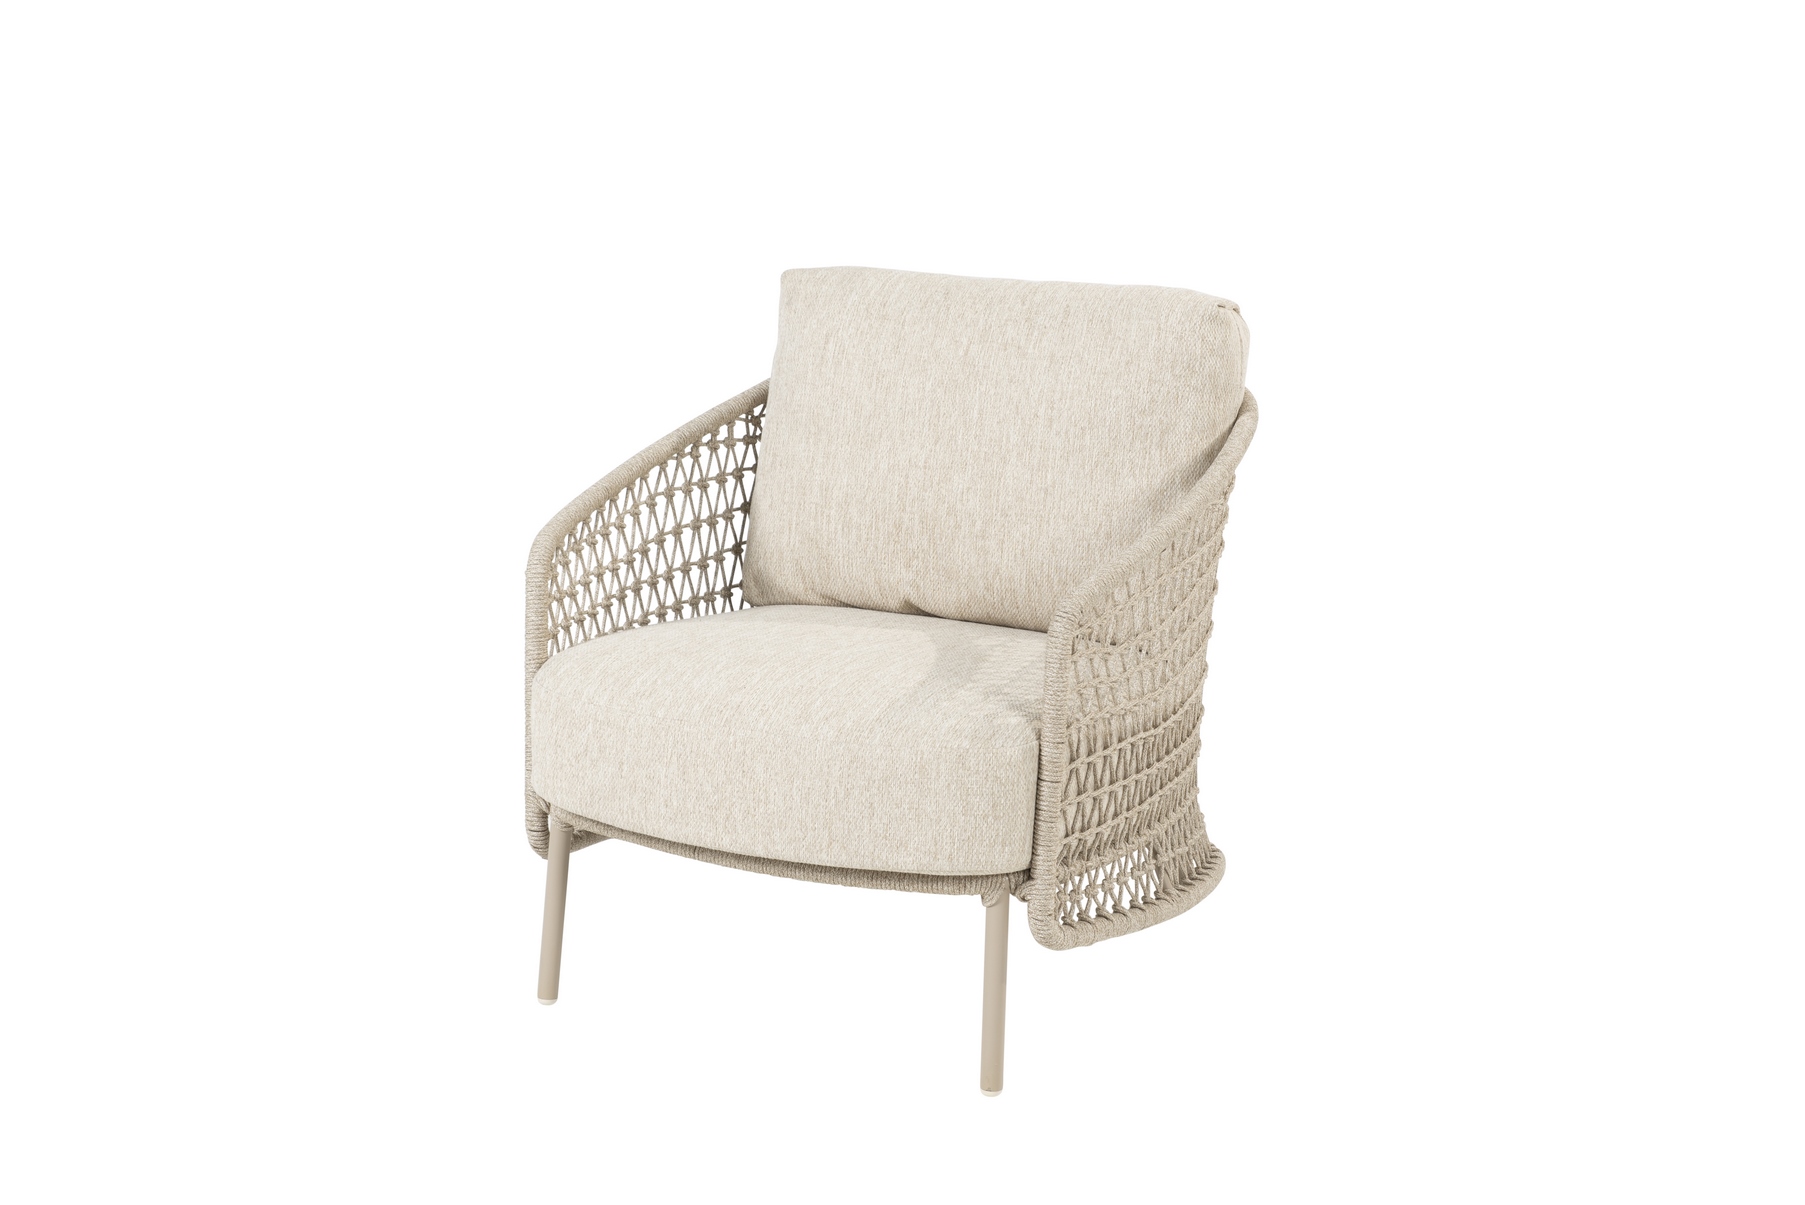 213936__Puccini_living_chair_latte_with_2_cushions_01.jpg